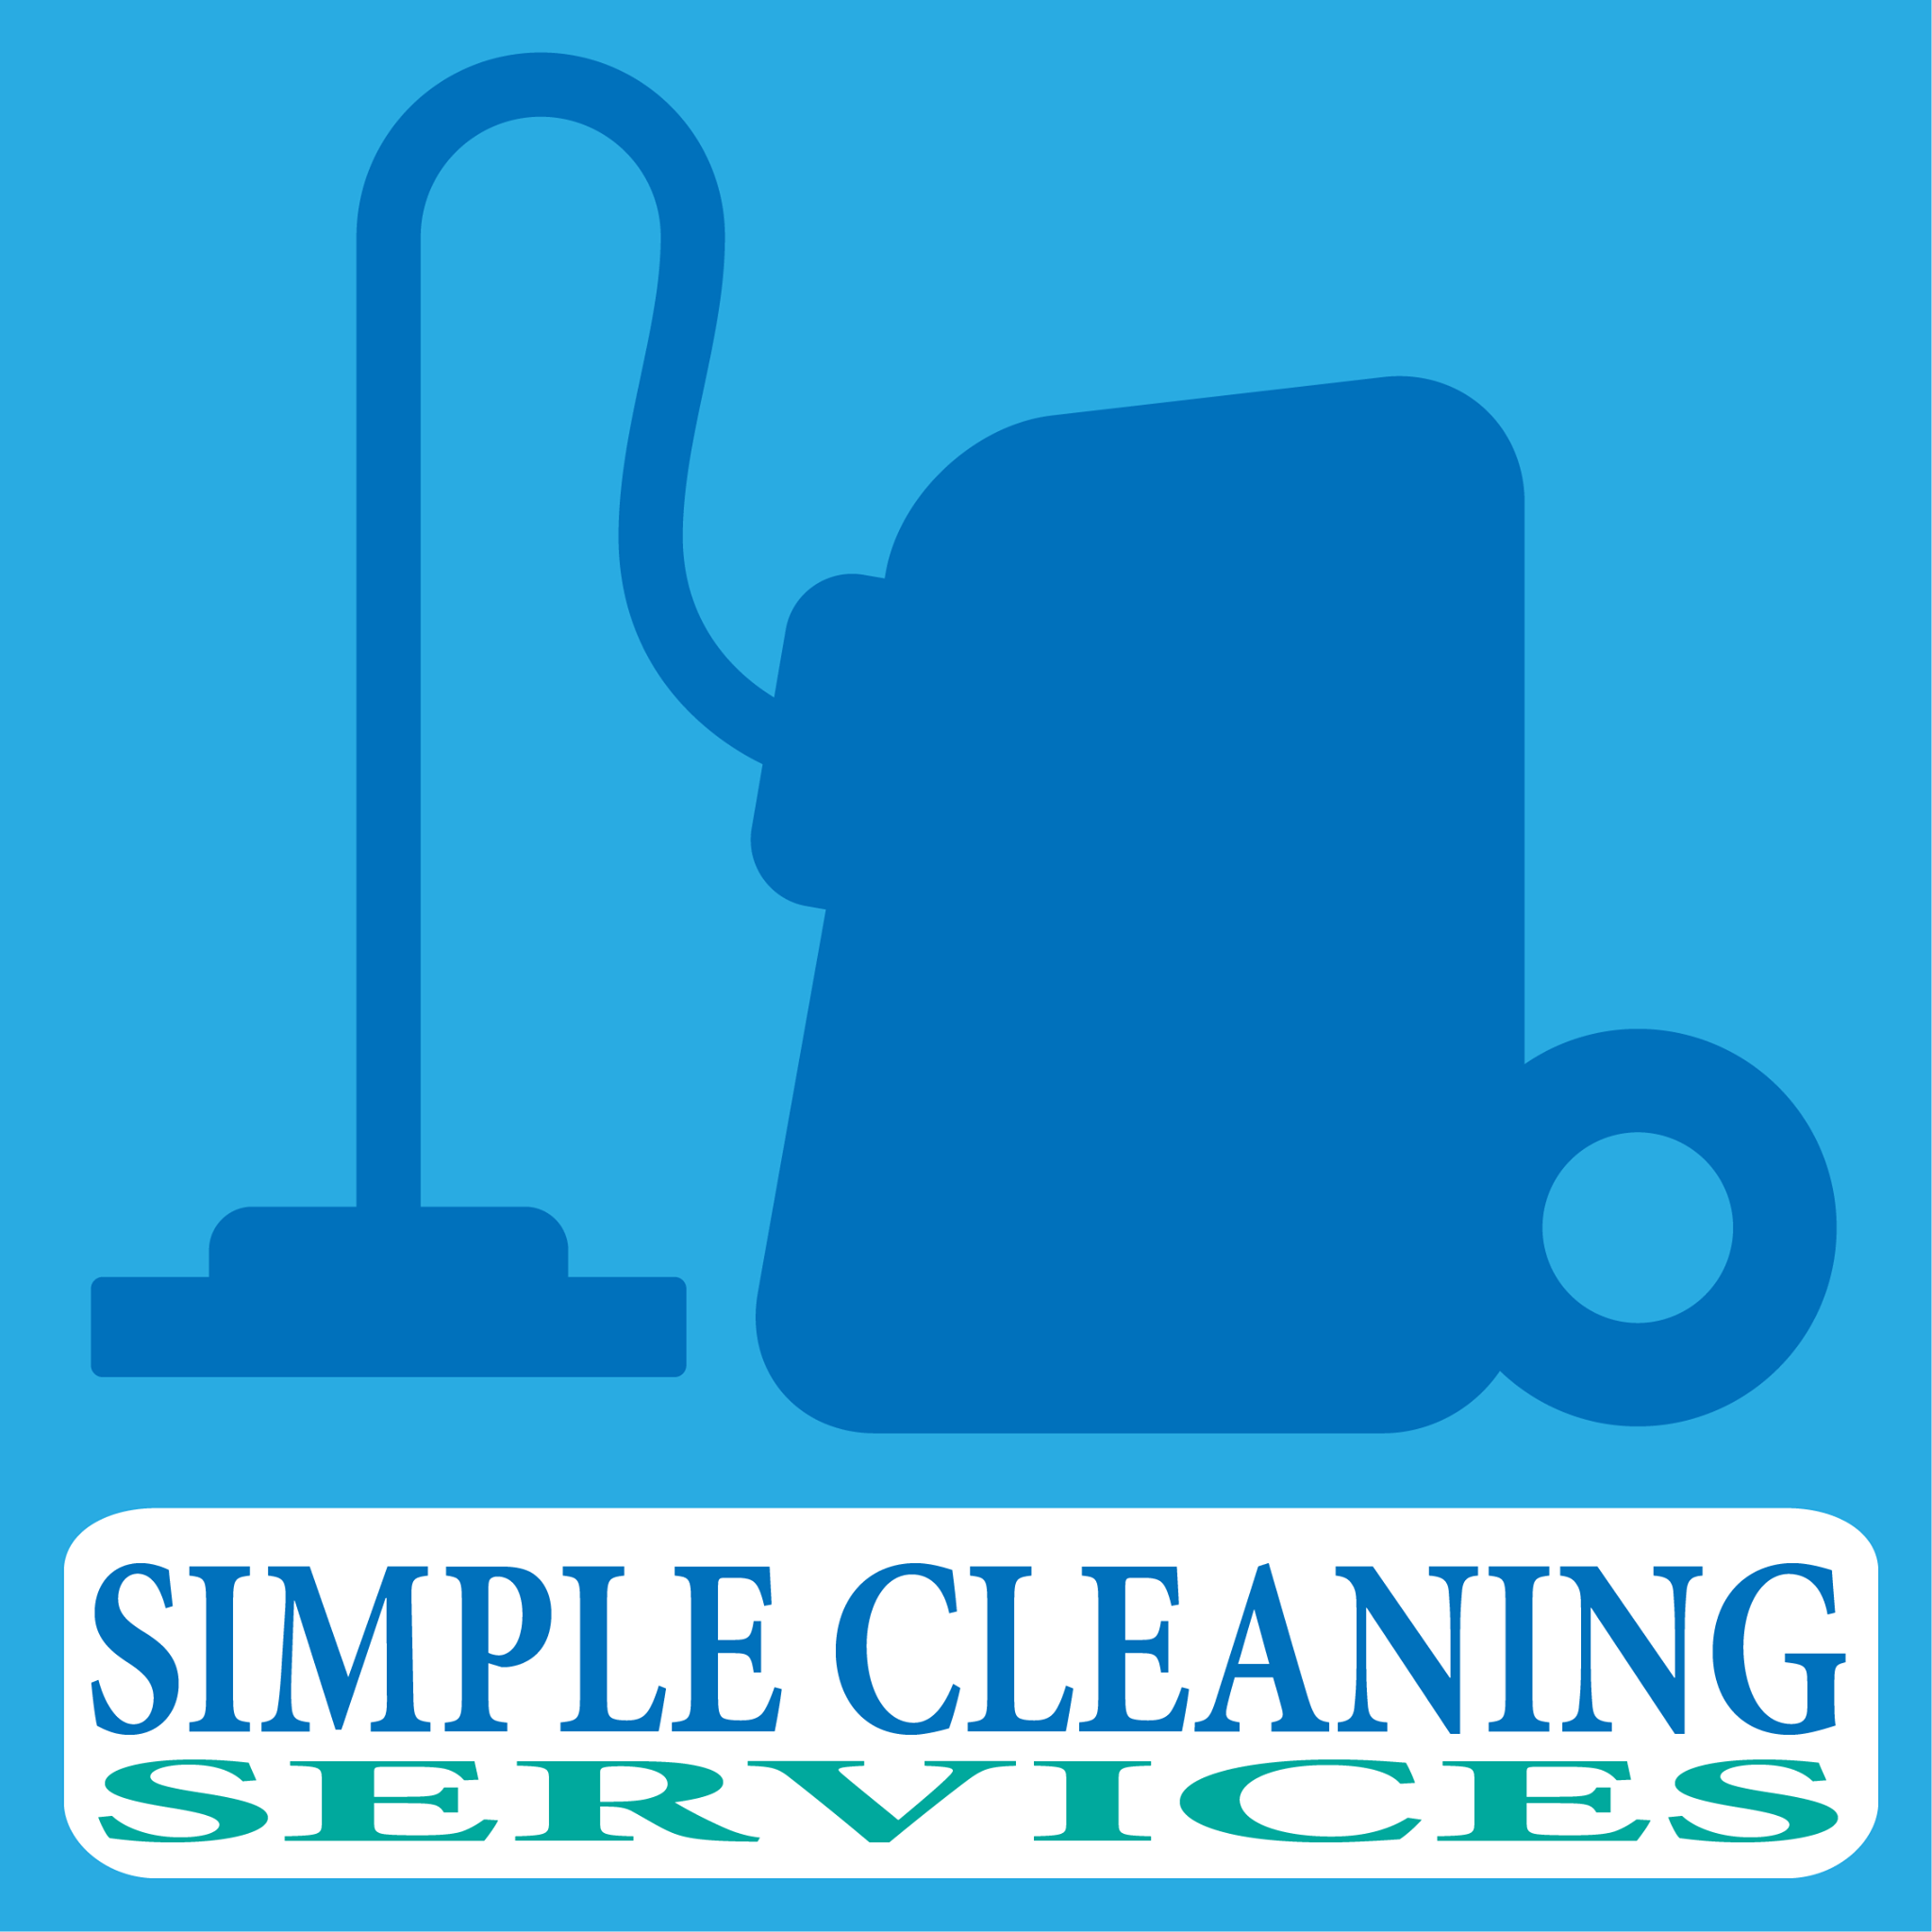 Simple Cleaning Services Logo